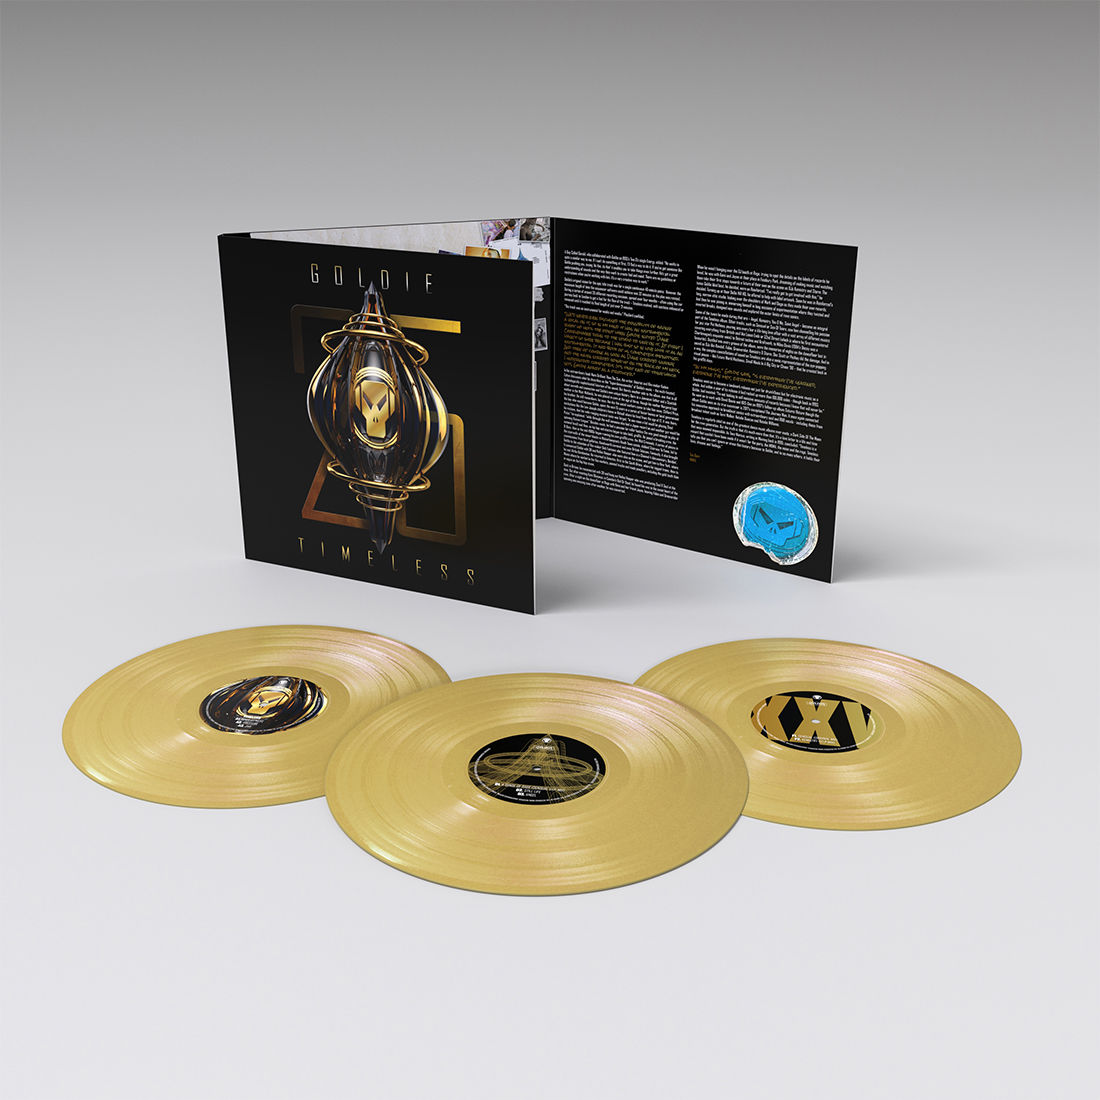 Timeless (25 Year Anniversary Edition): Limited Gold Vinyl 3LP